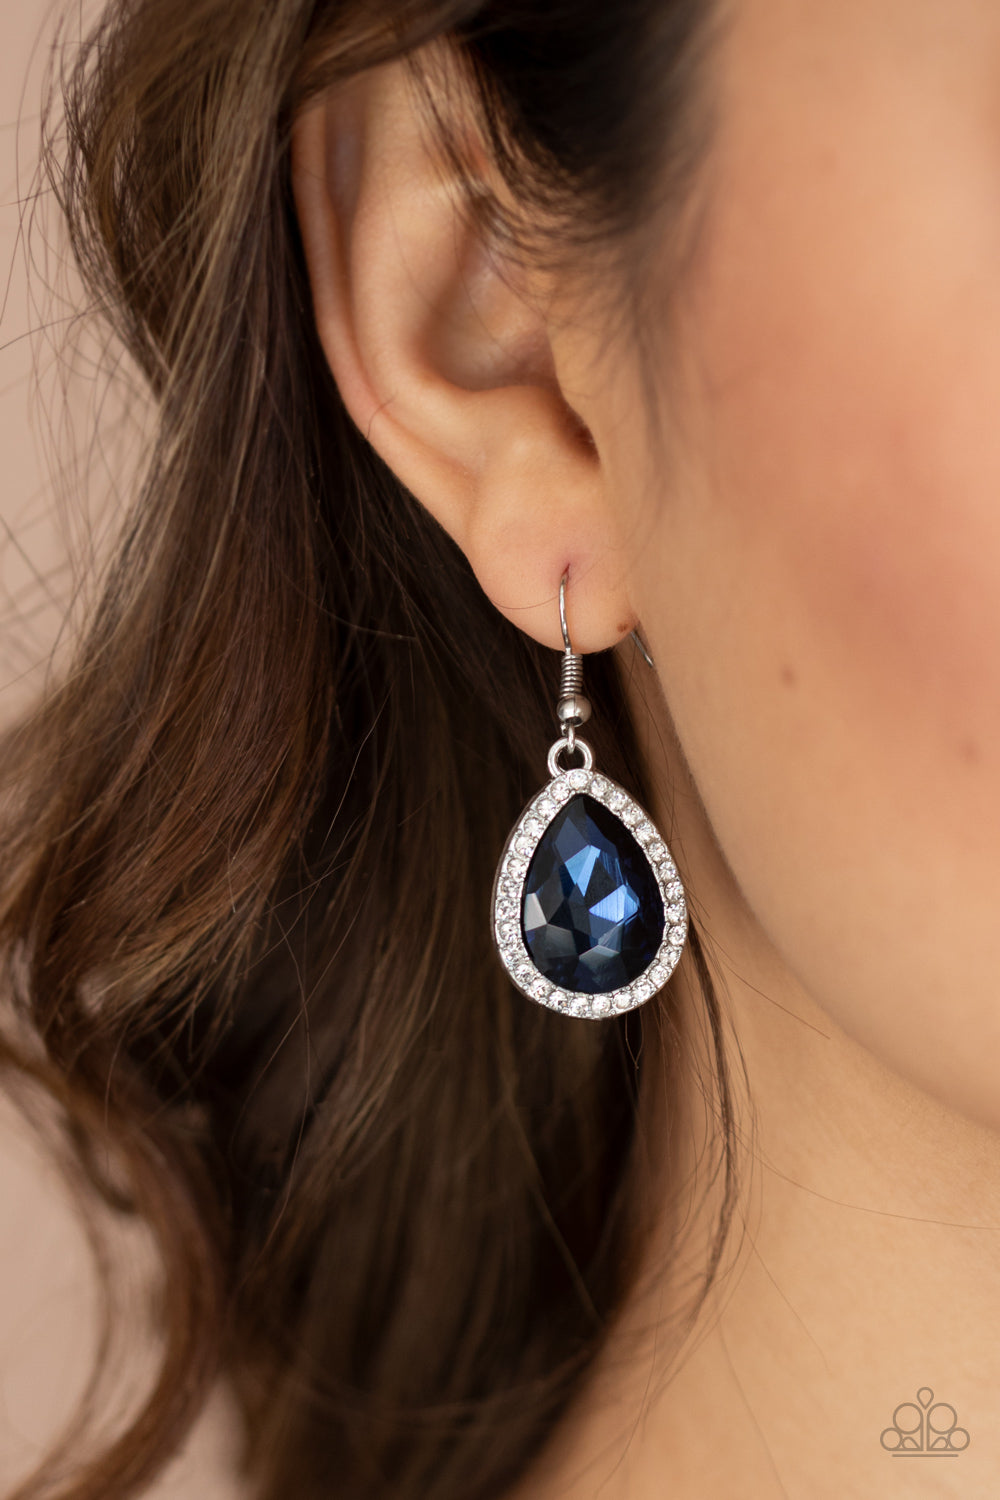 Dripping With Drama - Blue Oil Spill Earrings Paparazzi